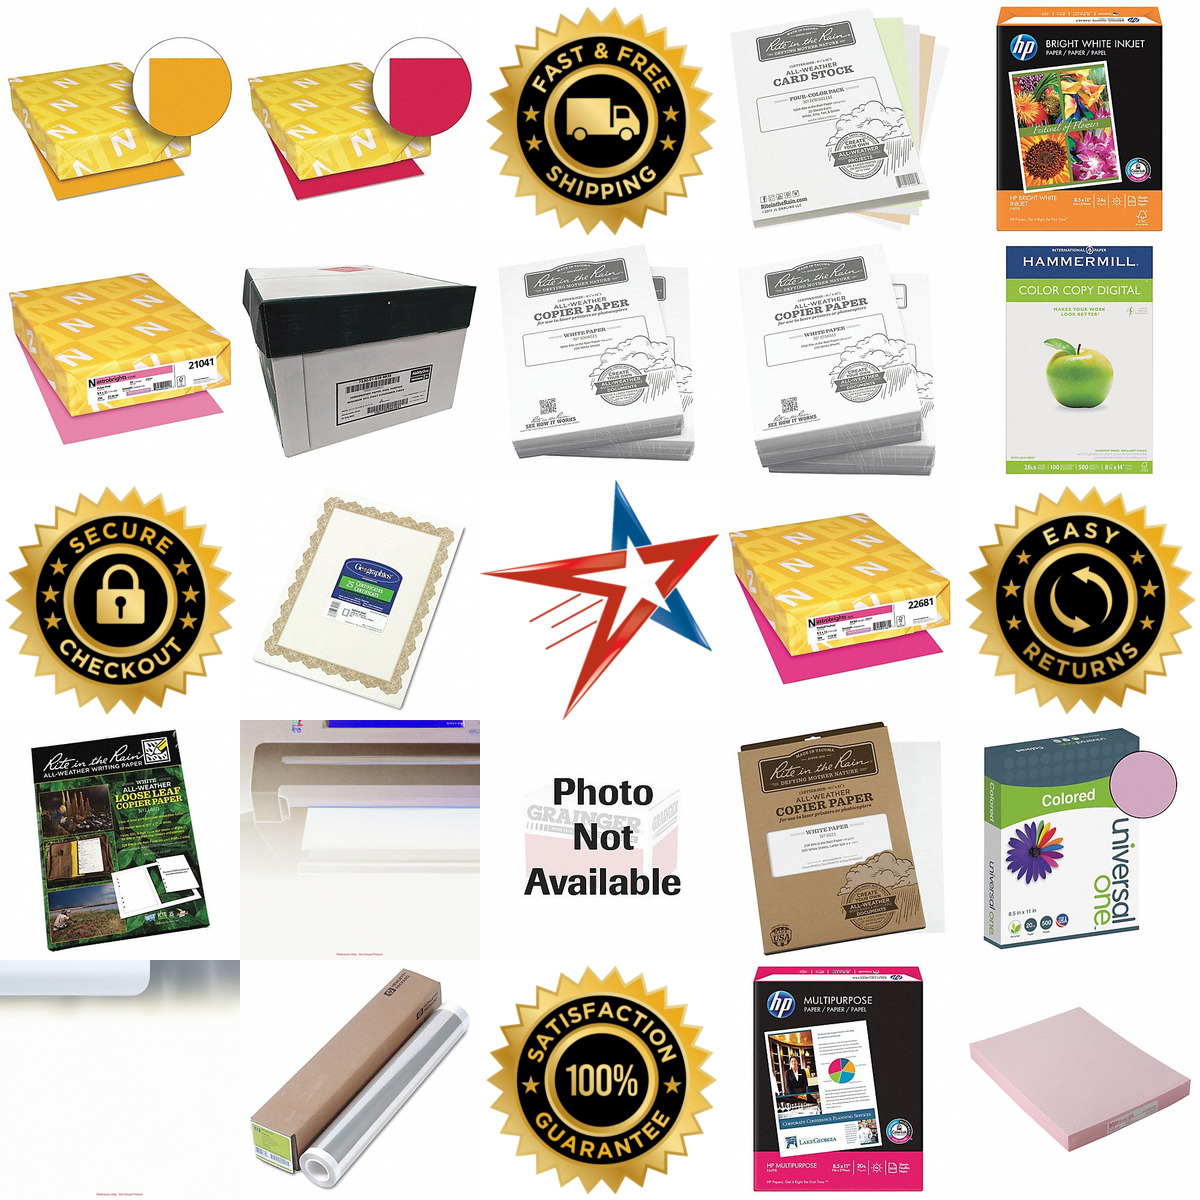 A selection of Copier Paper products on GoVets